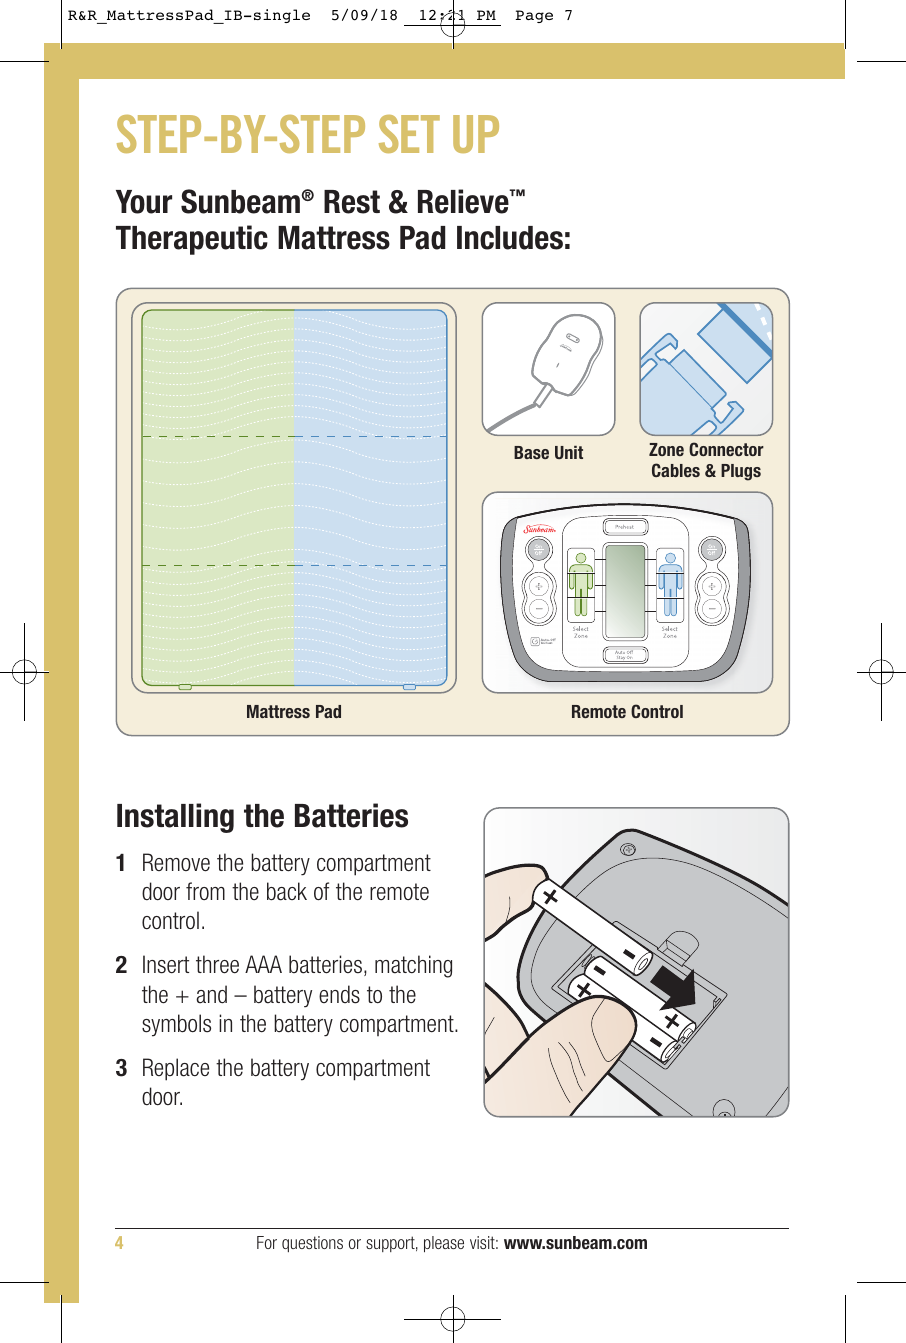 Your Sunbeam®Rest &amp; Relieve™Therapeutic Mattress Pad Includes:Mattress PadZone ConnectorCables &amp; PlugsBase UnitSTEP-BY-STEP SET UPInstalling the Batteries1Remove the battery compartmentdoor from the back of the remotecontrol.2Insert three AAA batteries, matchingthe + and – battery ends to thesymbols in the battery compartment.3Replace the battery compartmentdoor.Remote Control4For questions or support, please visit: www.sunbeam.comR&amp;R_MattressPad_IB-single    12:21 PM  Page 7